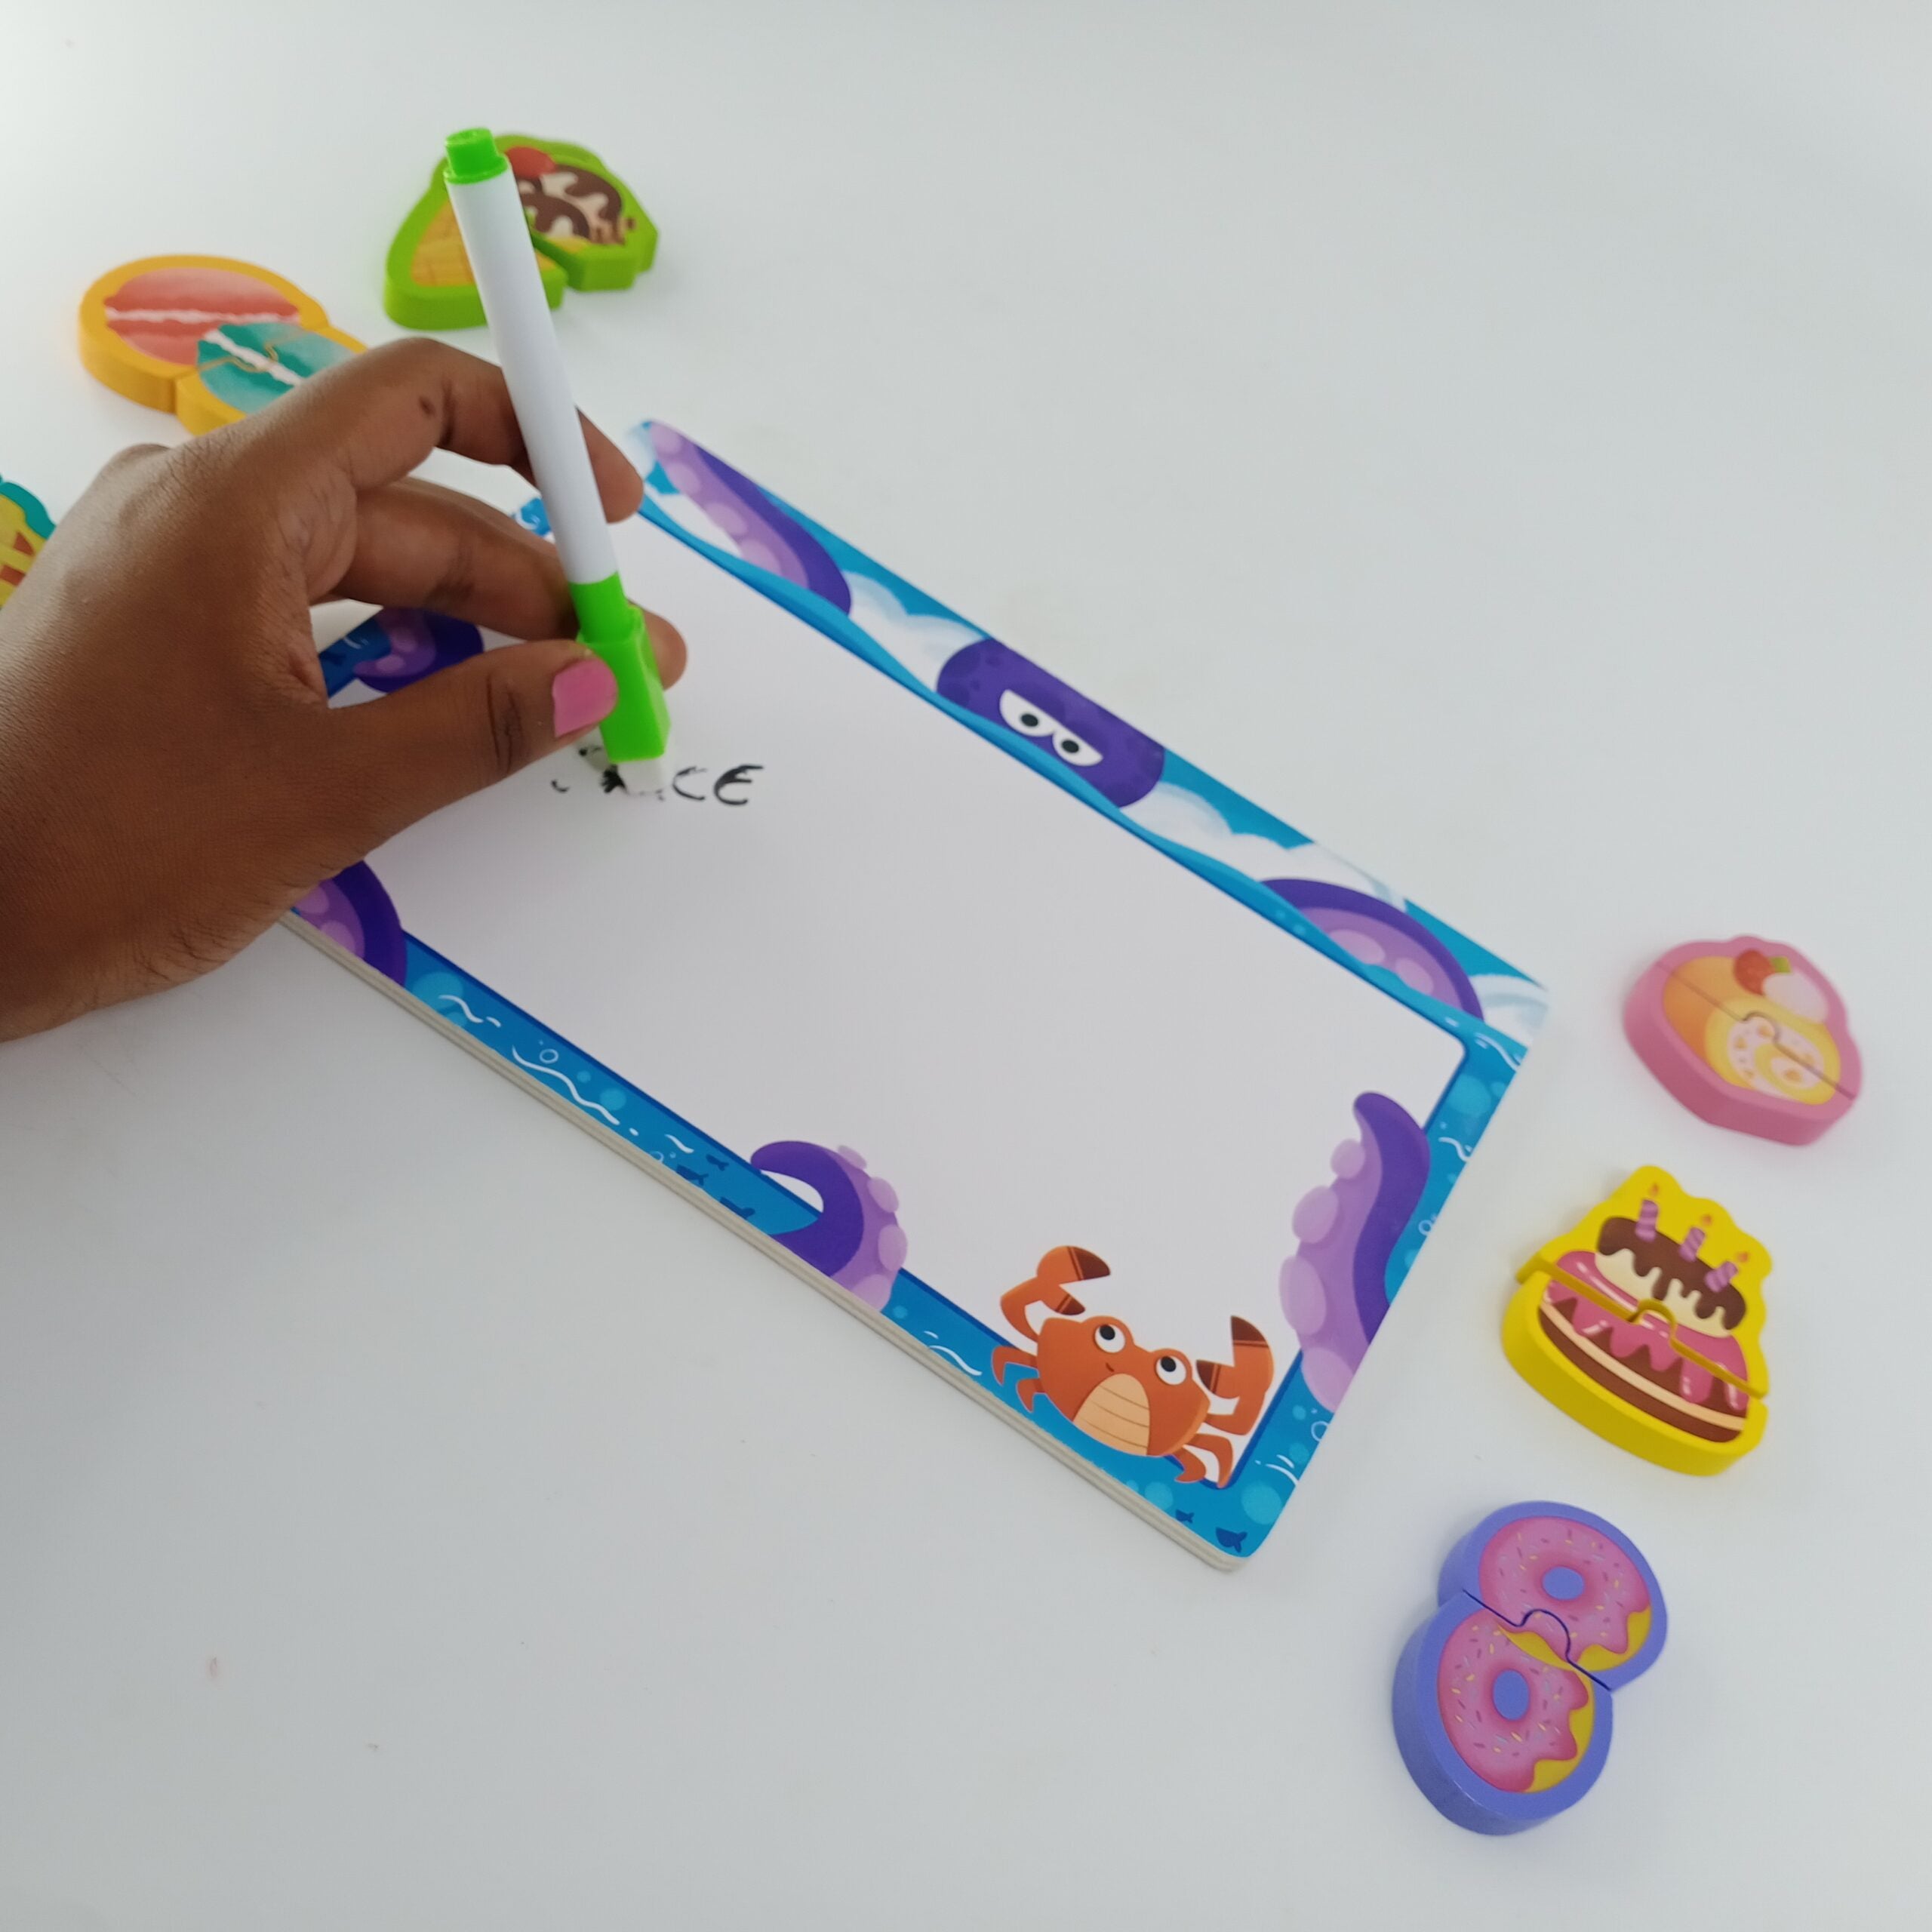 Wooden Puzzles writing board - great for learning - Junk Foods - EKT2396